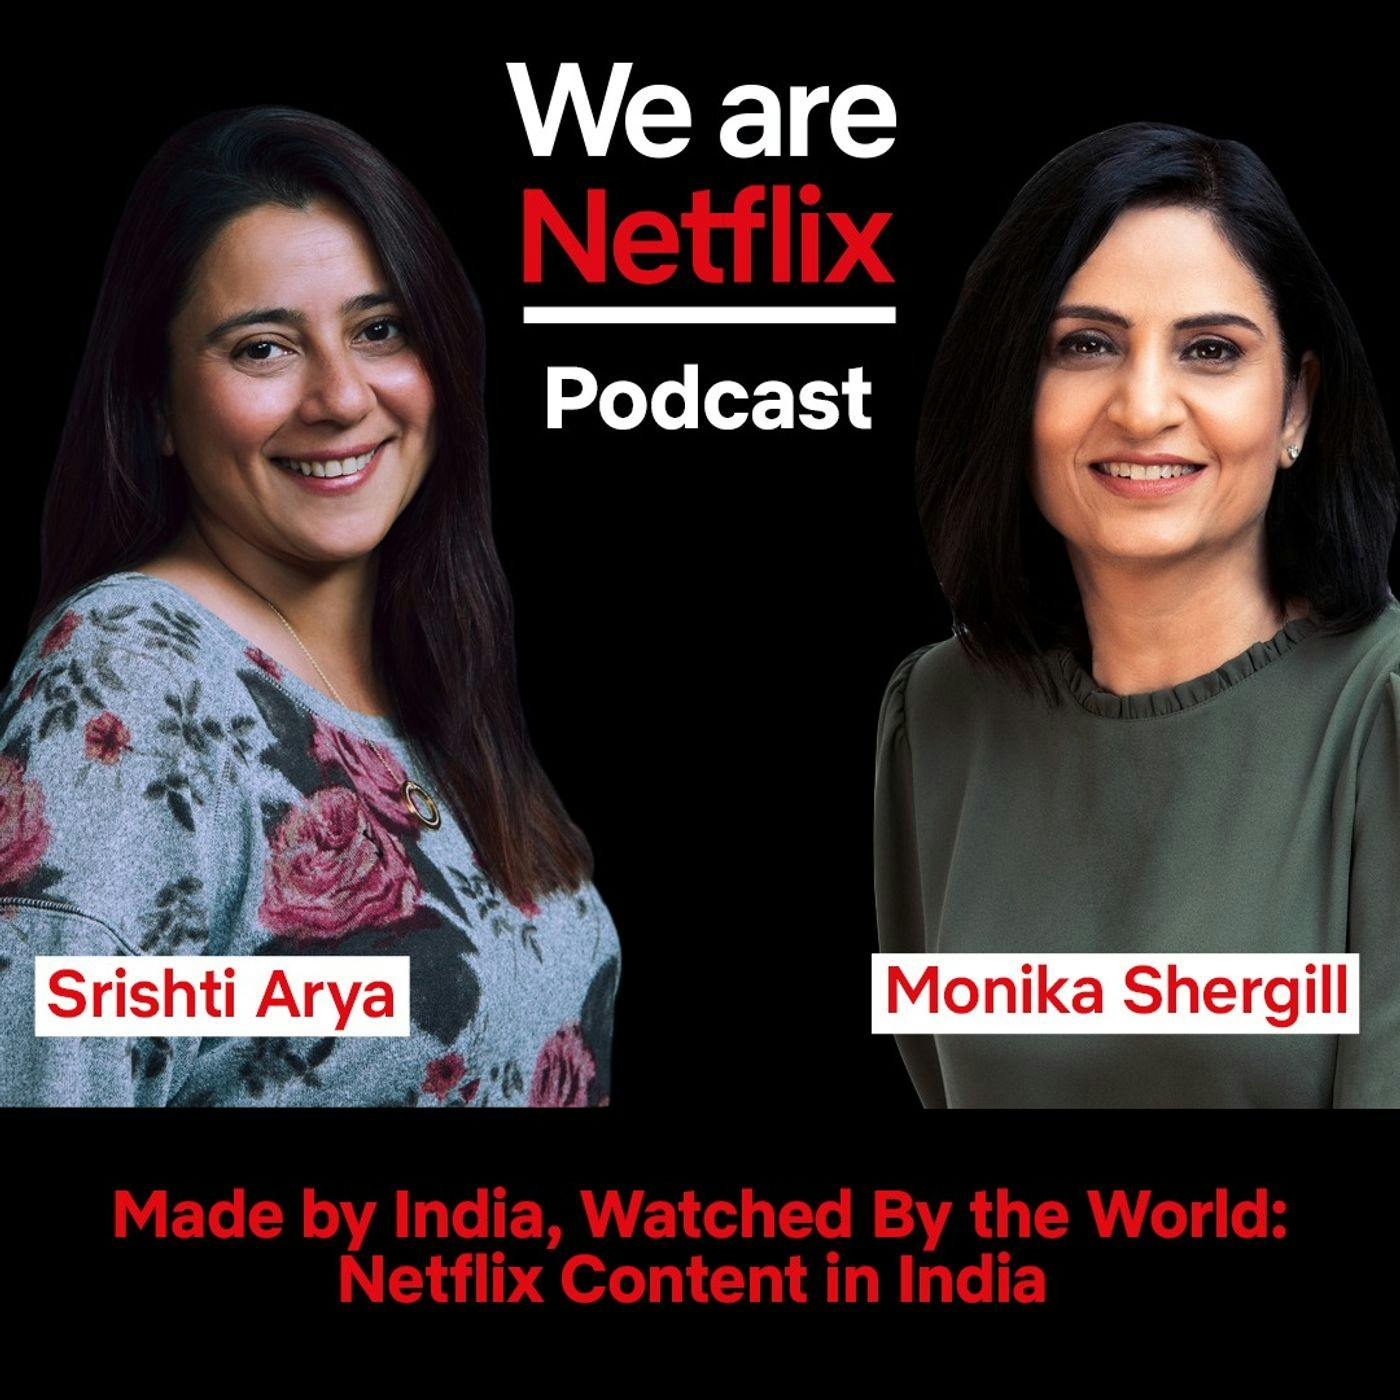 Made by India, Watched By the World